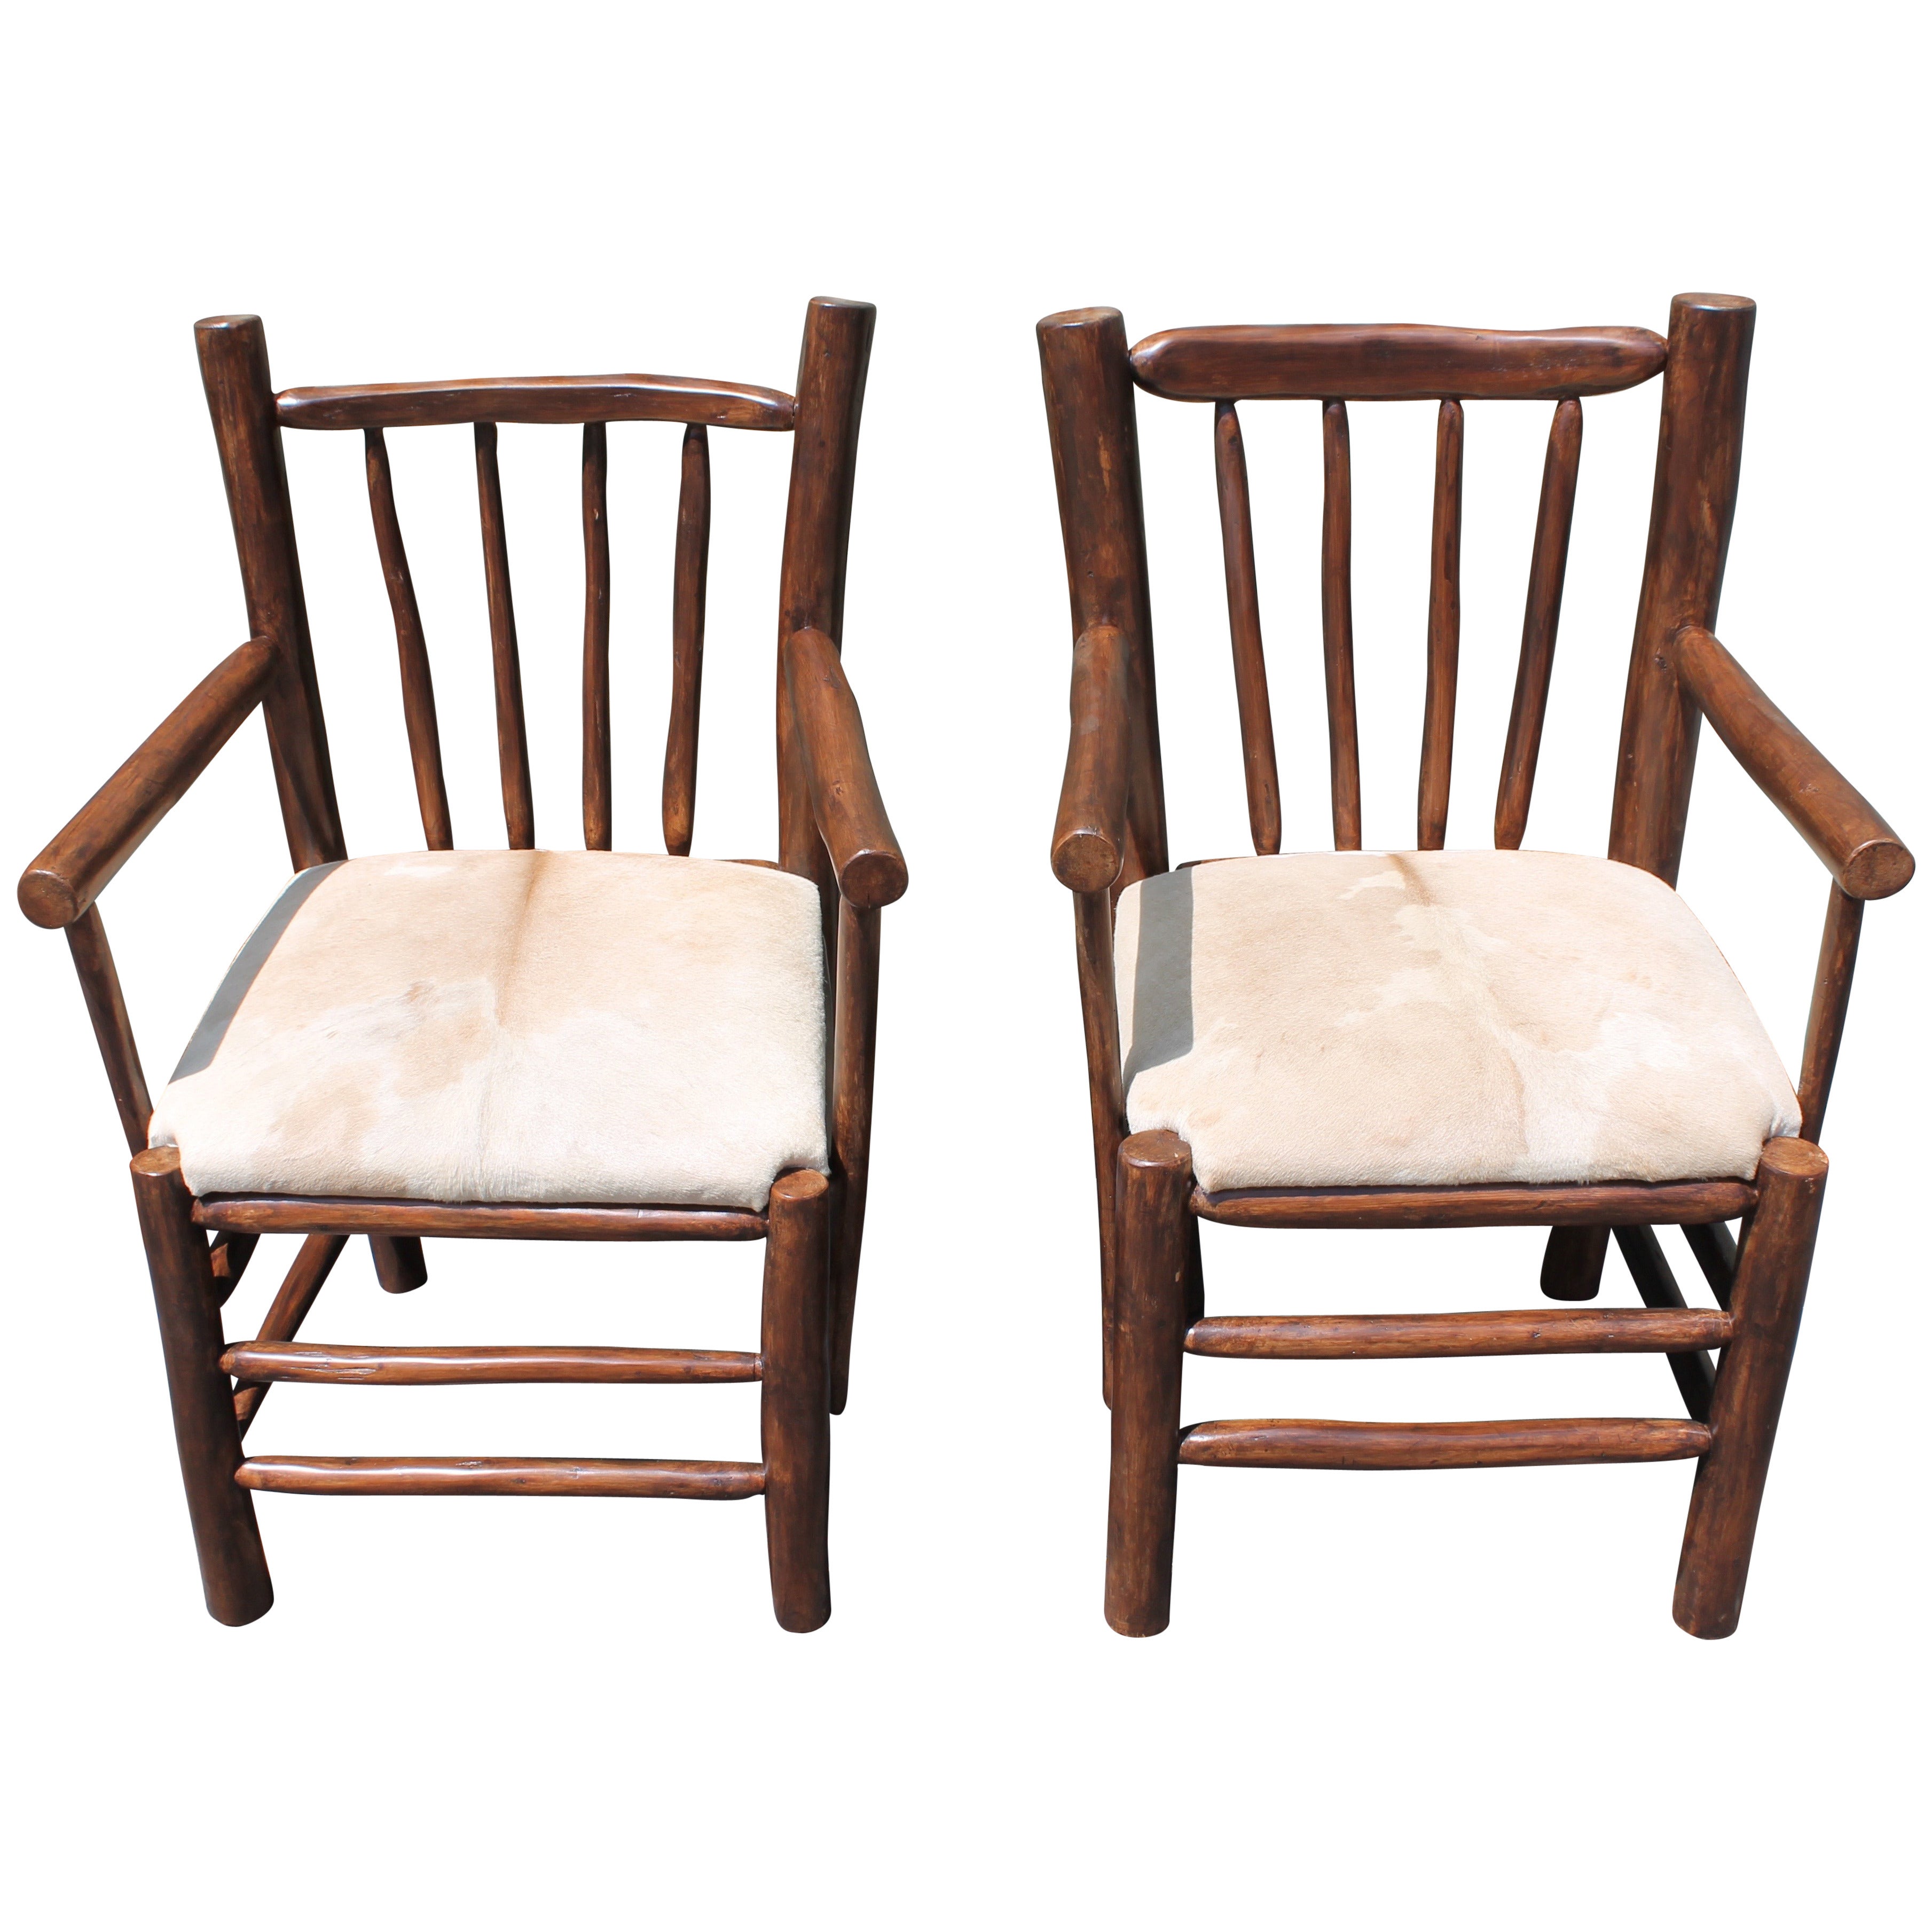 Pair of Rustic  Hickory Chairs With Cow Hide Seats